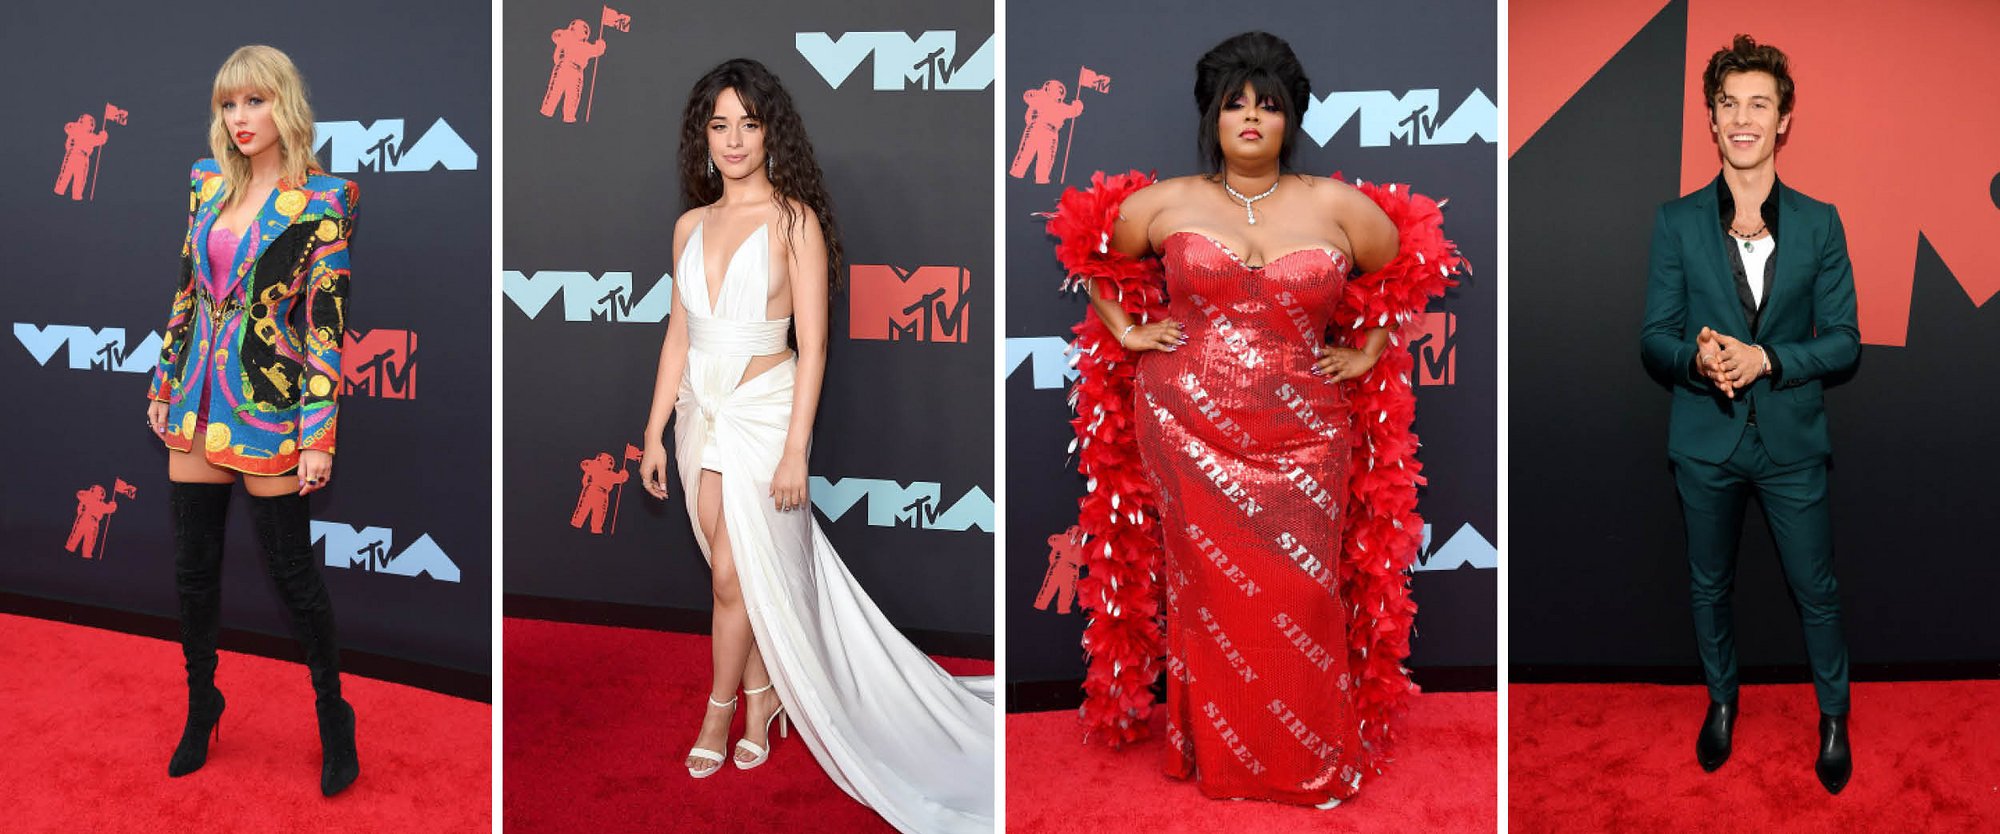 Best Dressed at the MTV VMA 2019 AD Singh